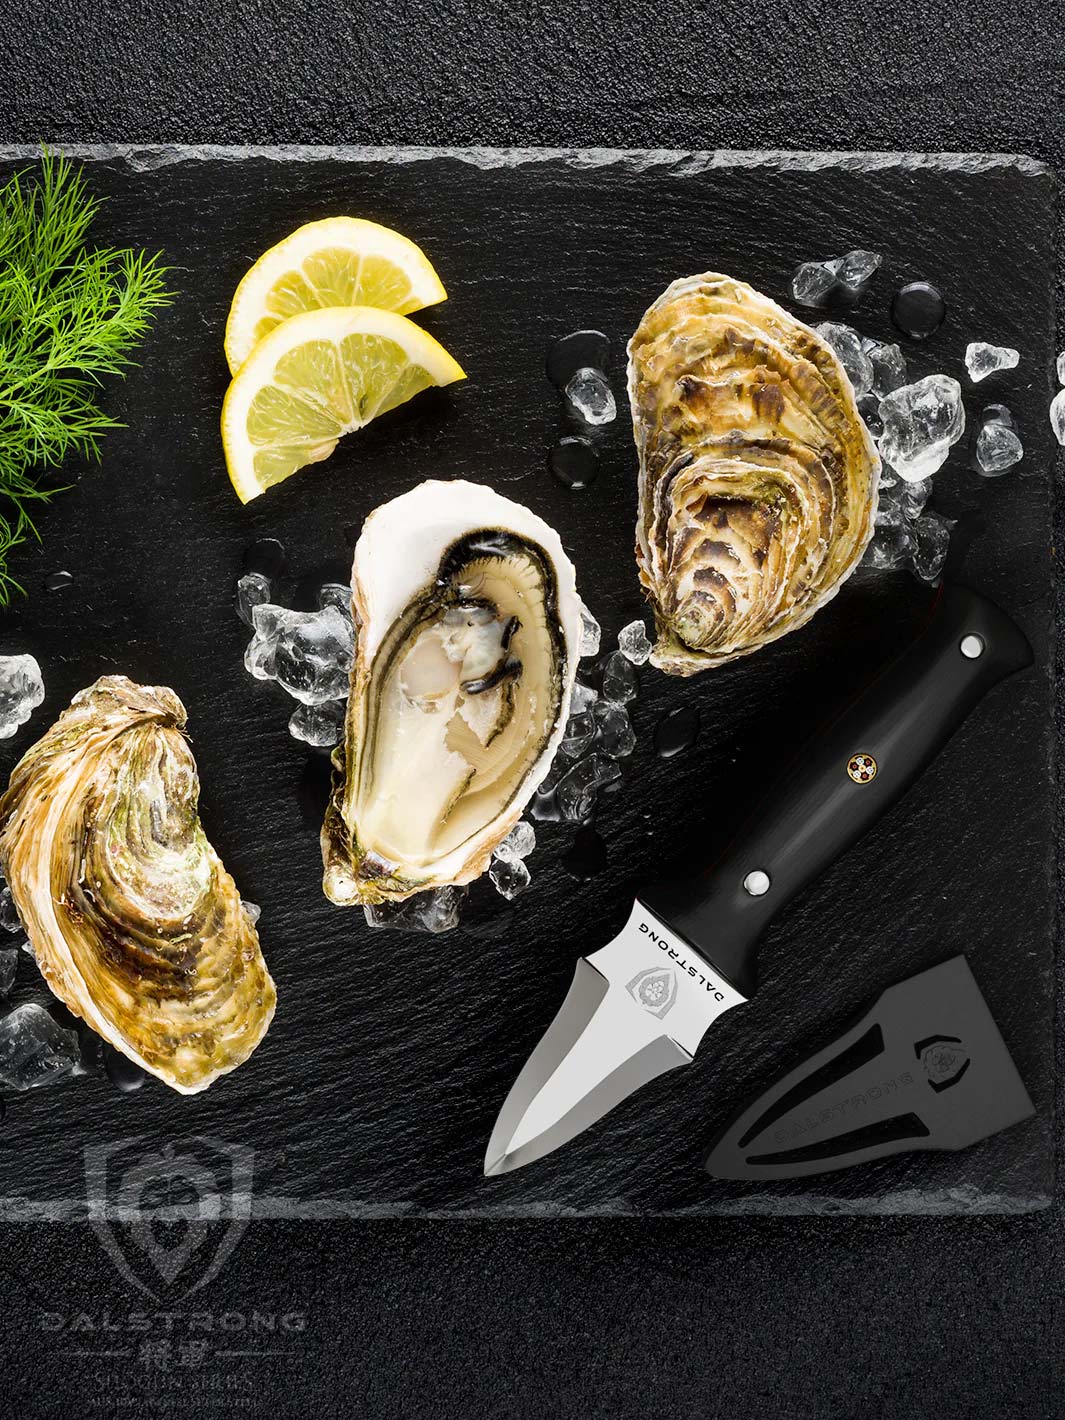 Dalstrong shogun series 3.5 inch oyster knife with black handle and three oysters in the middle.